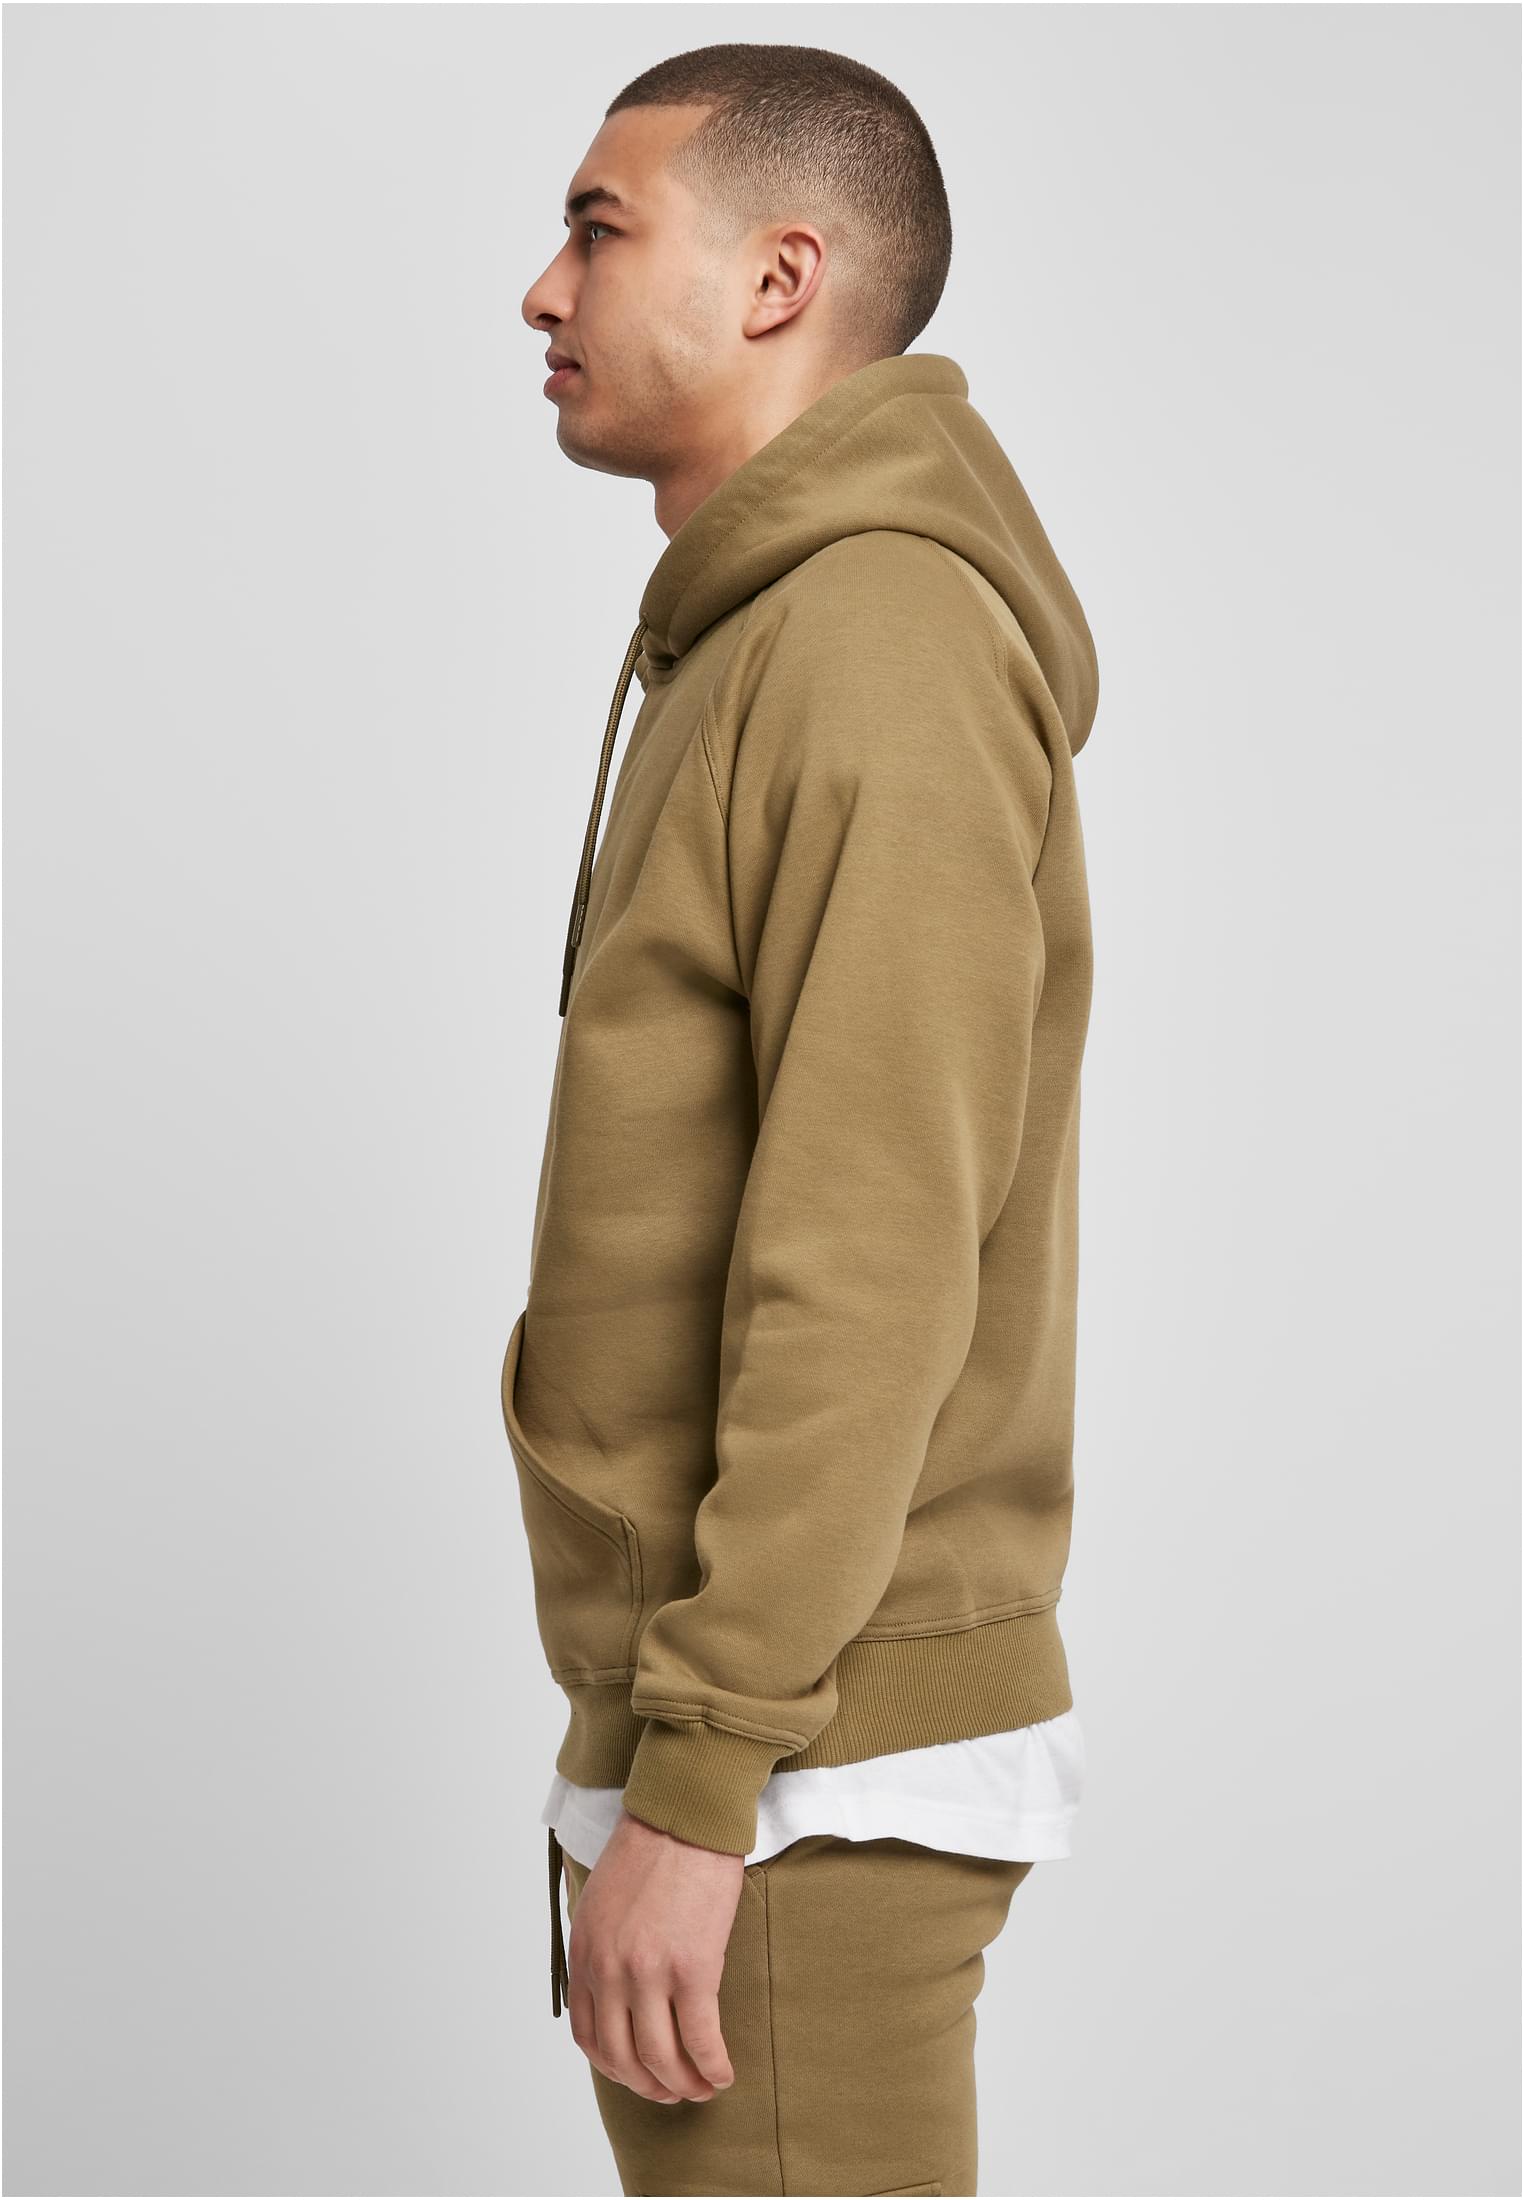 Plus Size Blank Hoody in Farbe tiniolive